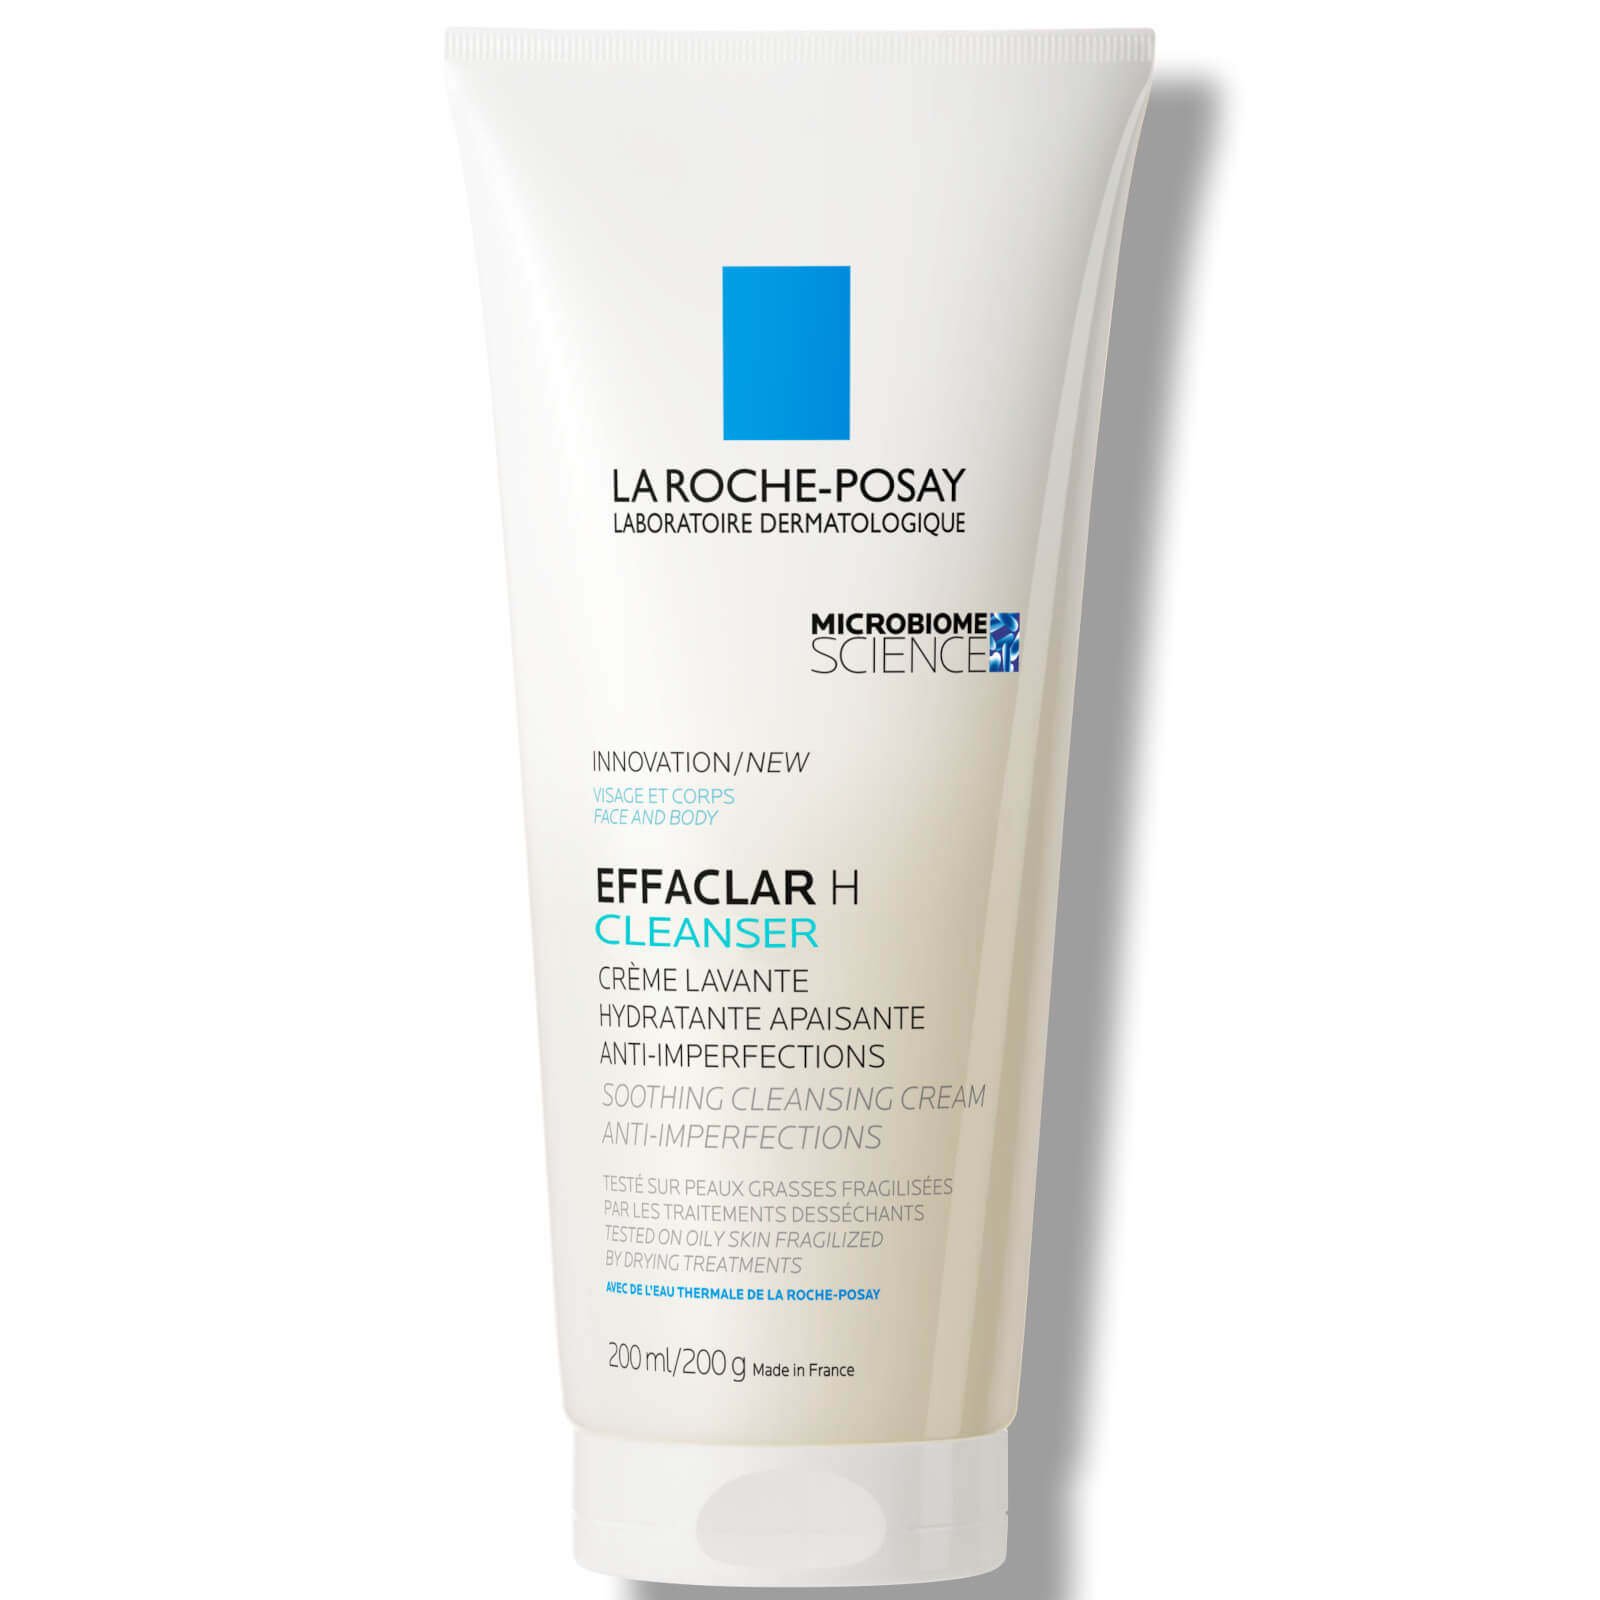 Photos - Facial / Body Cleansing Product La Roche Posay La Roche-Posay Effaclar H Iso-Biome Cleanser 